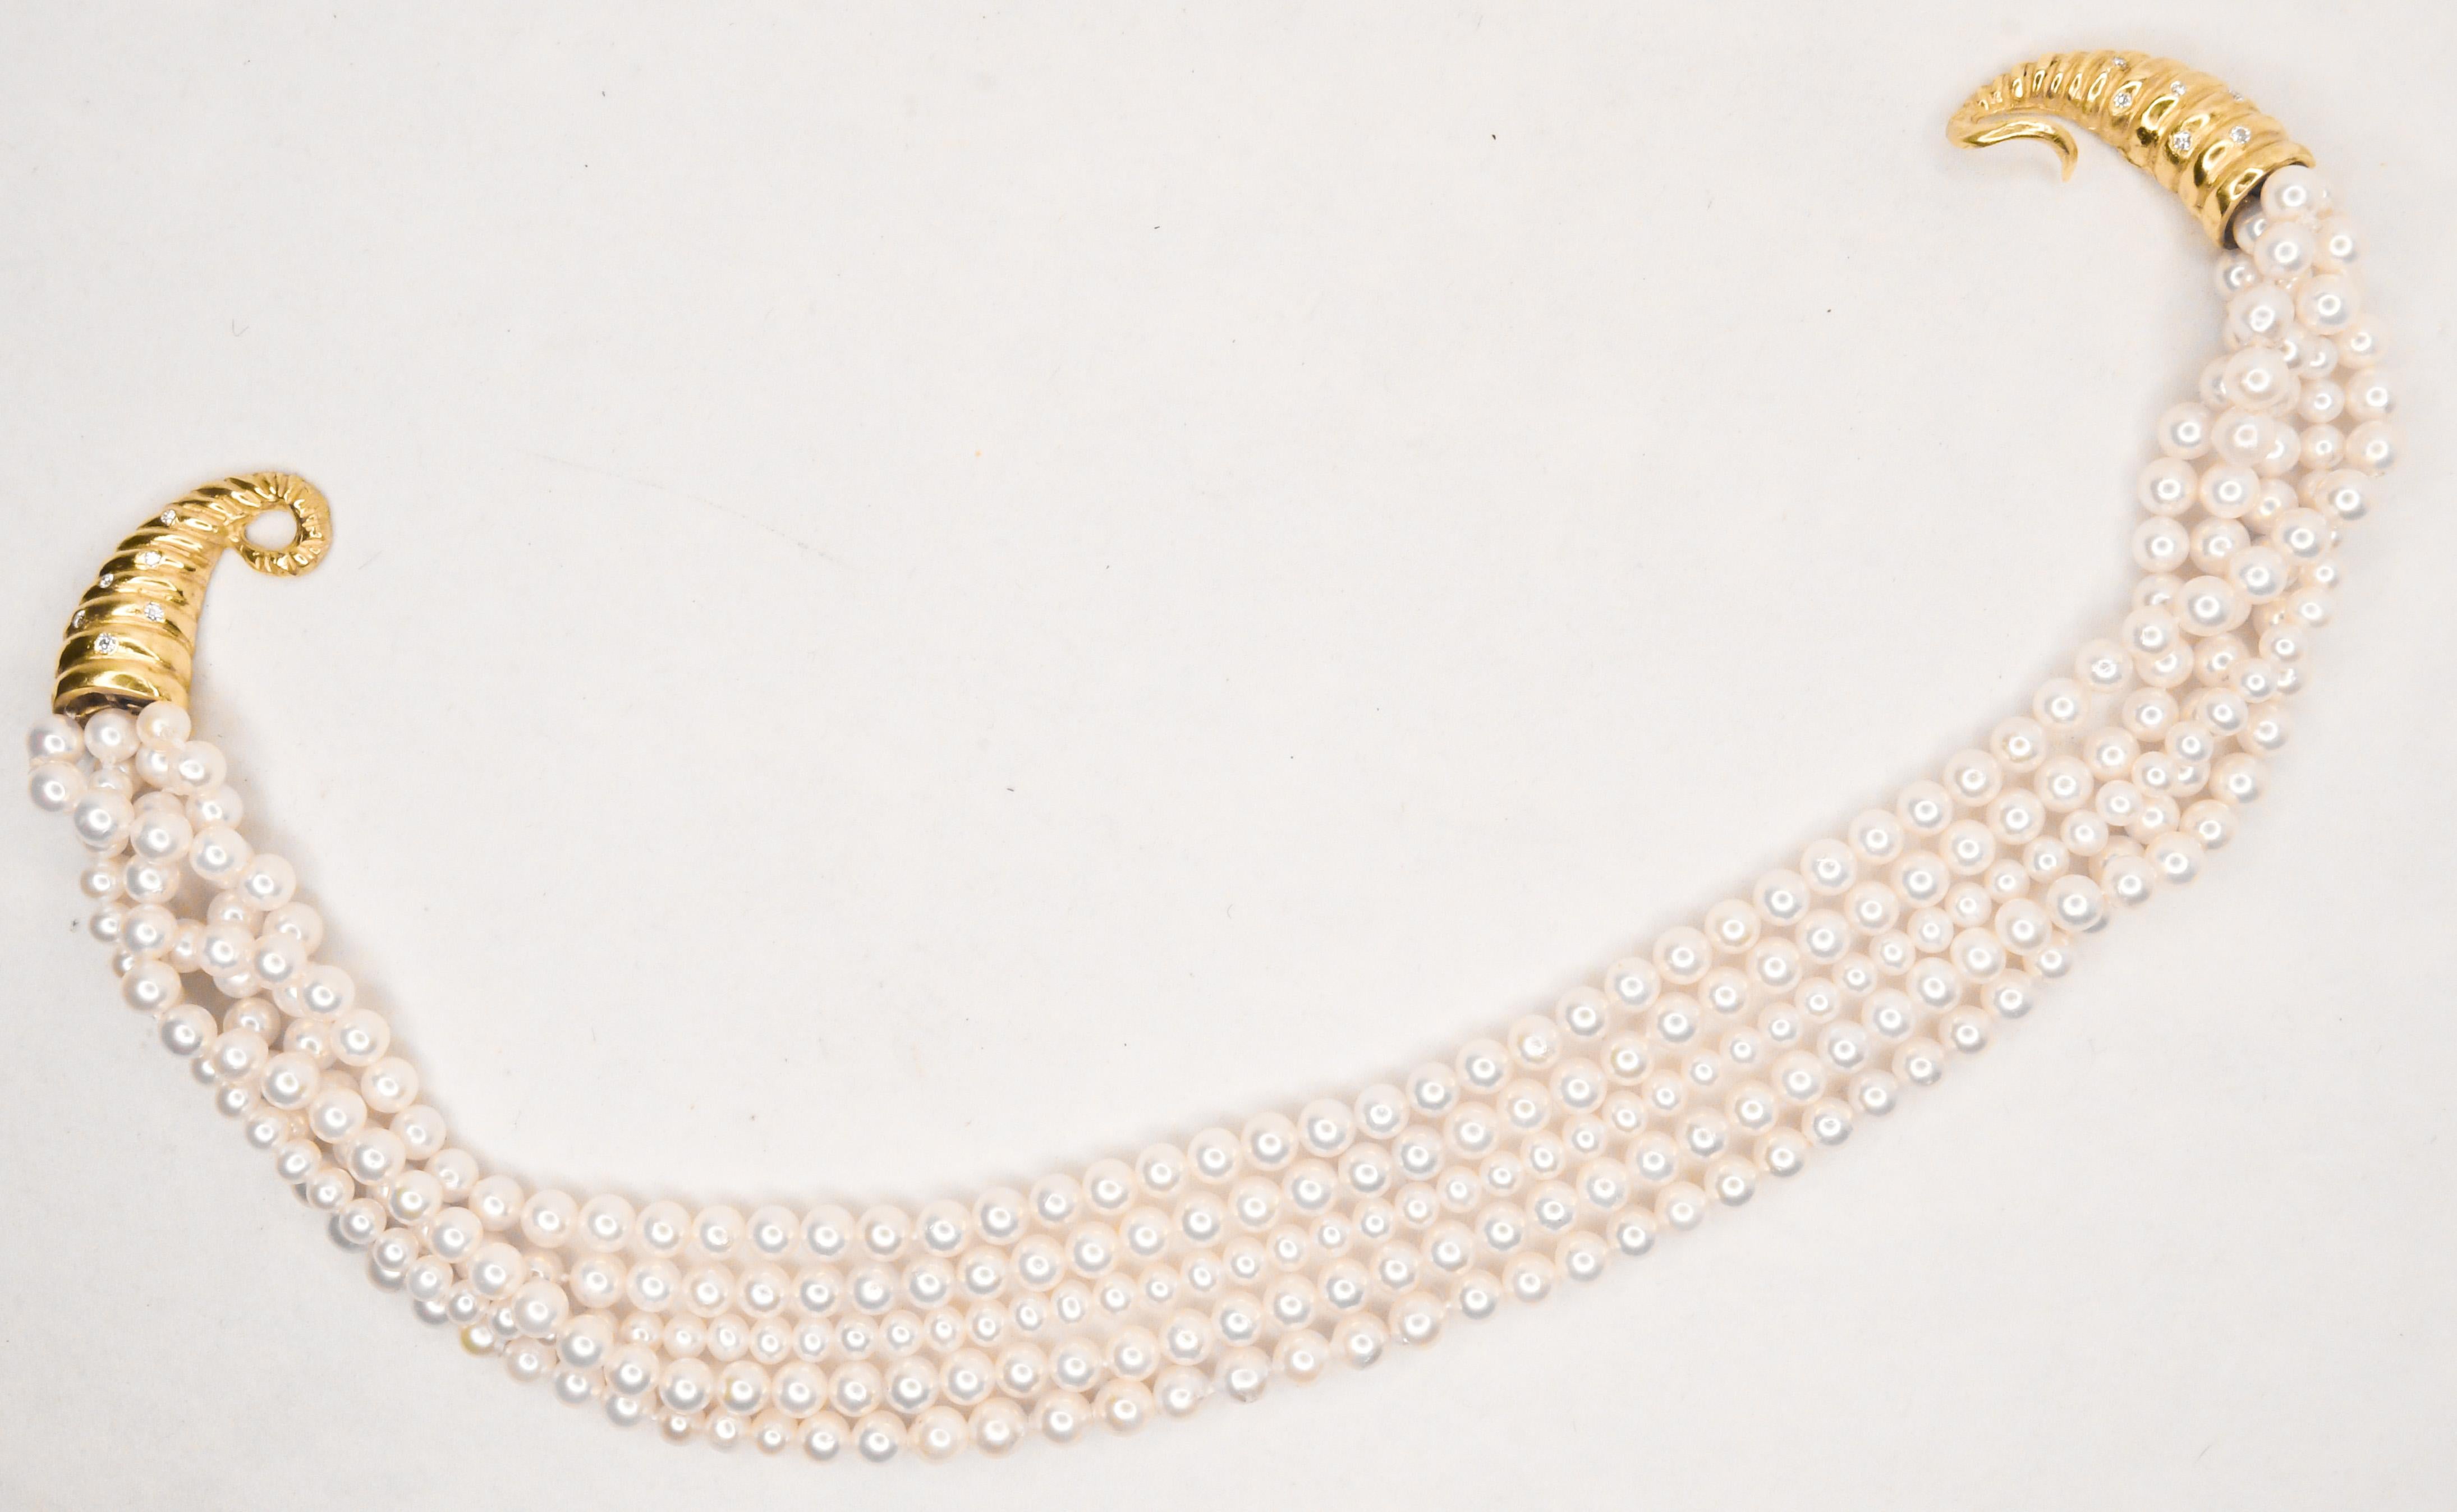 Julia Boss Multistrand Pearl Necklace with 18KYG Cornucopia Clasp with Diamonds For Sale 3